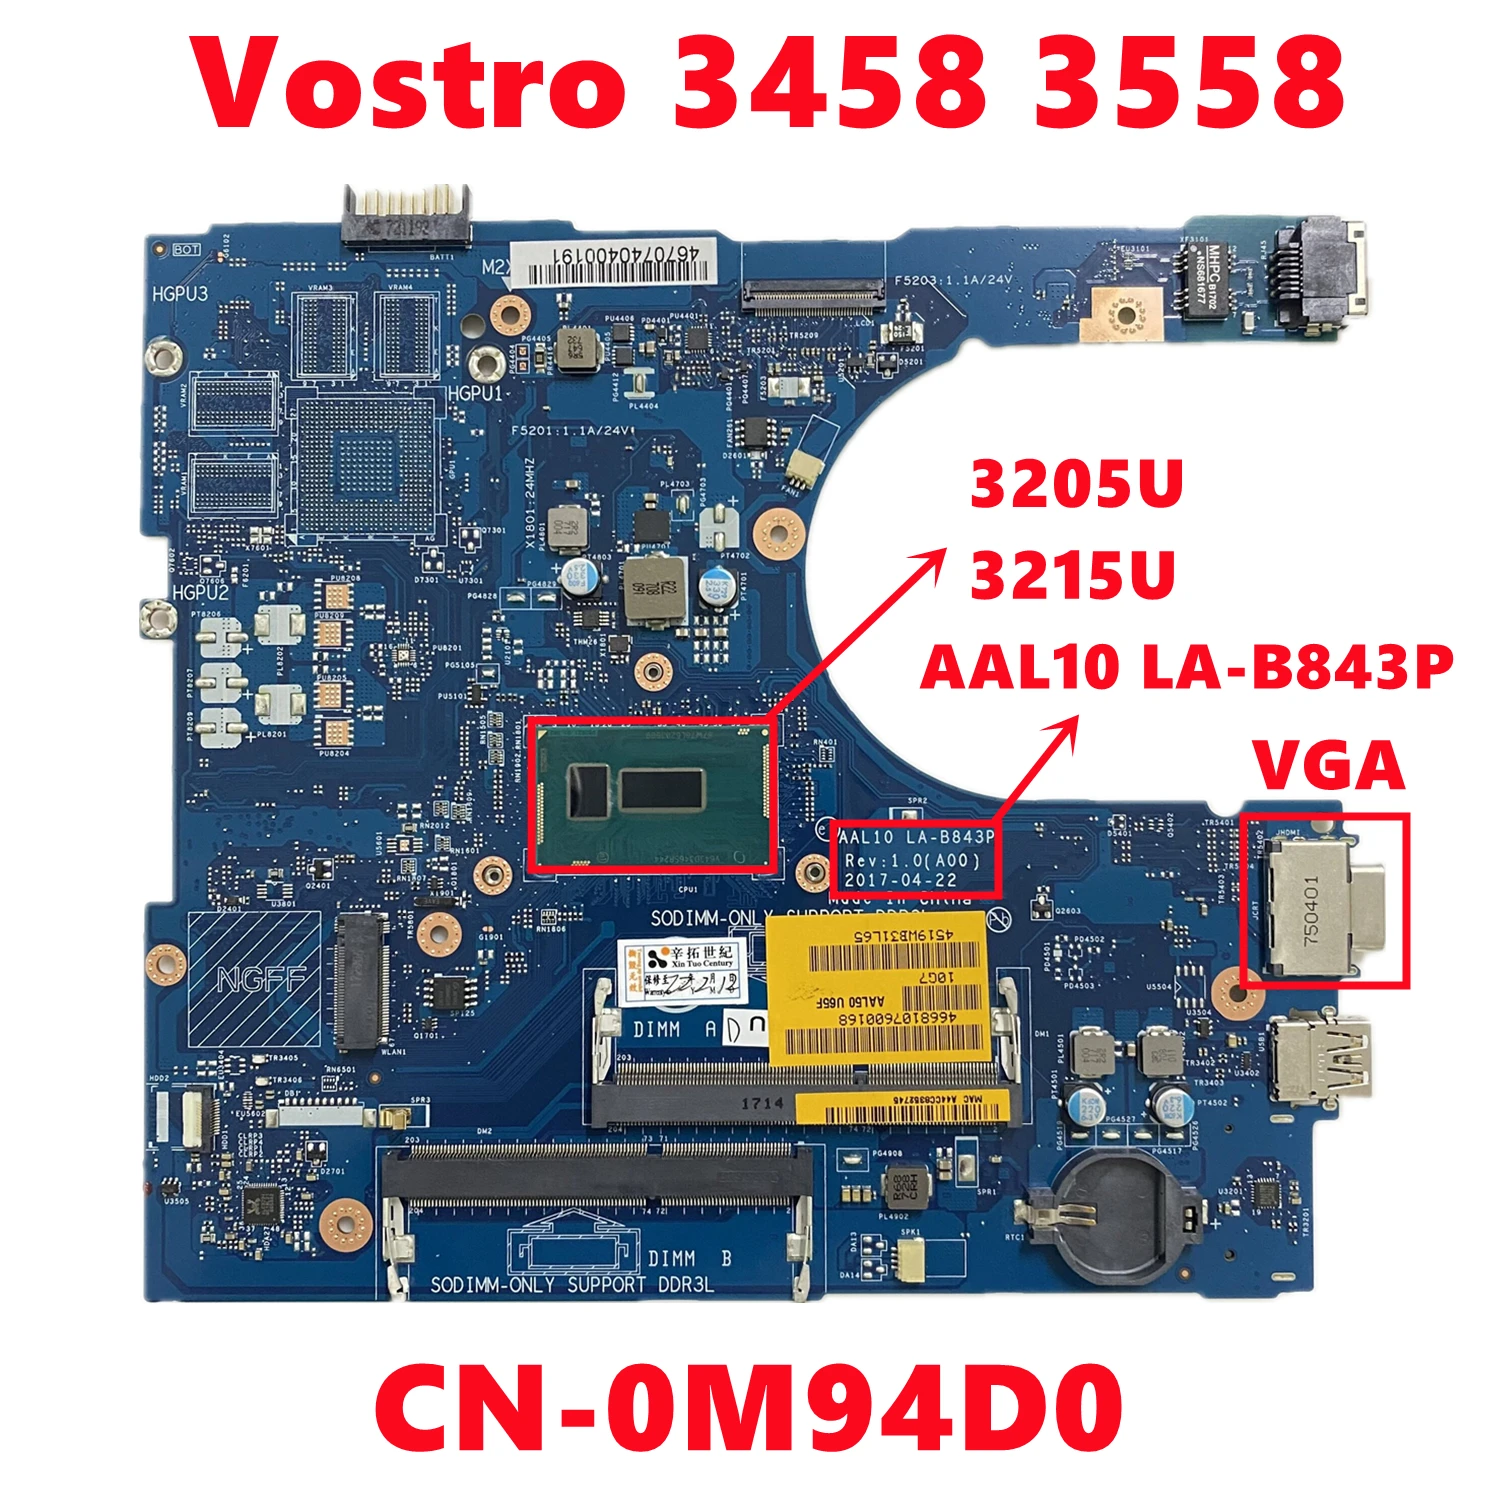 

CN-0M94D0 0M94D0 M94D0 For dell Vostro 3458 3558 Laptop Motherboard AAL10 LA-B843P With 3205U 3215U CPU DDR3L 100% Tested OK